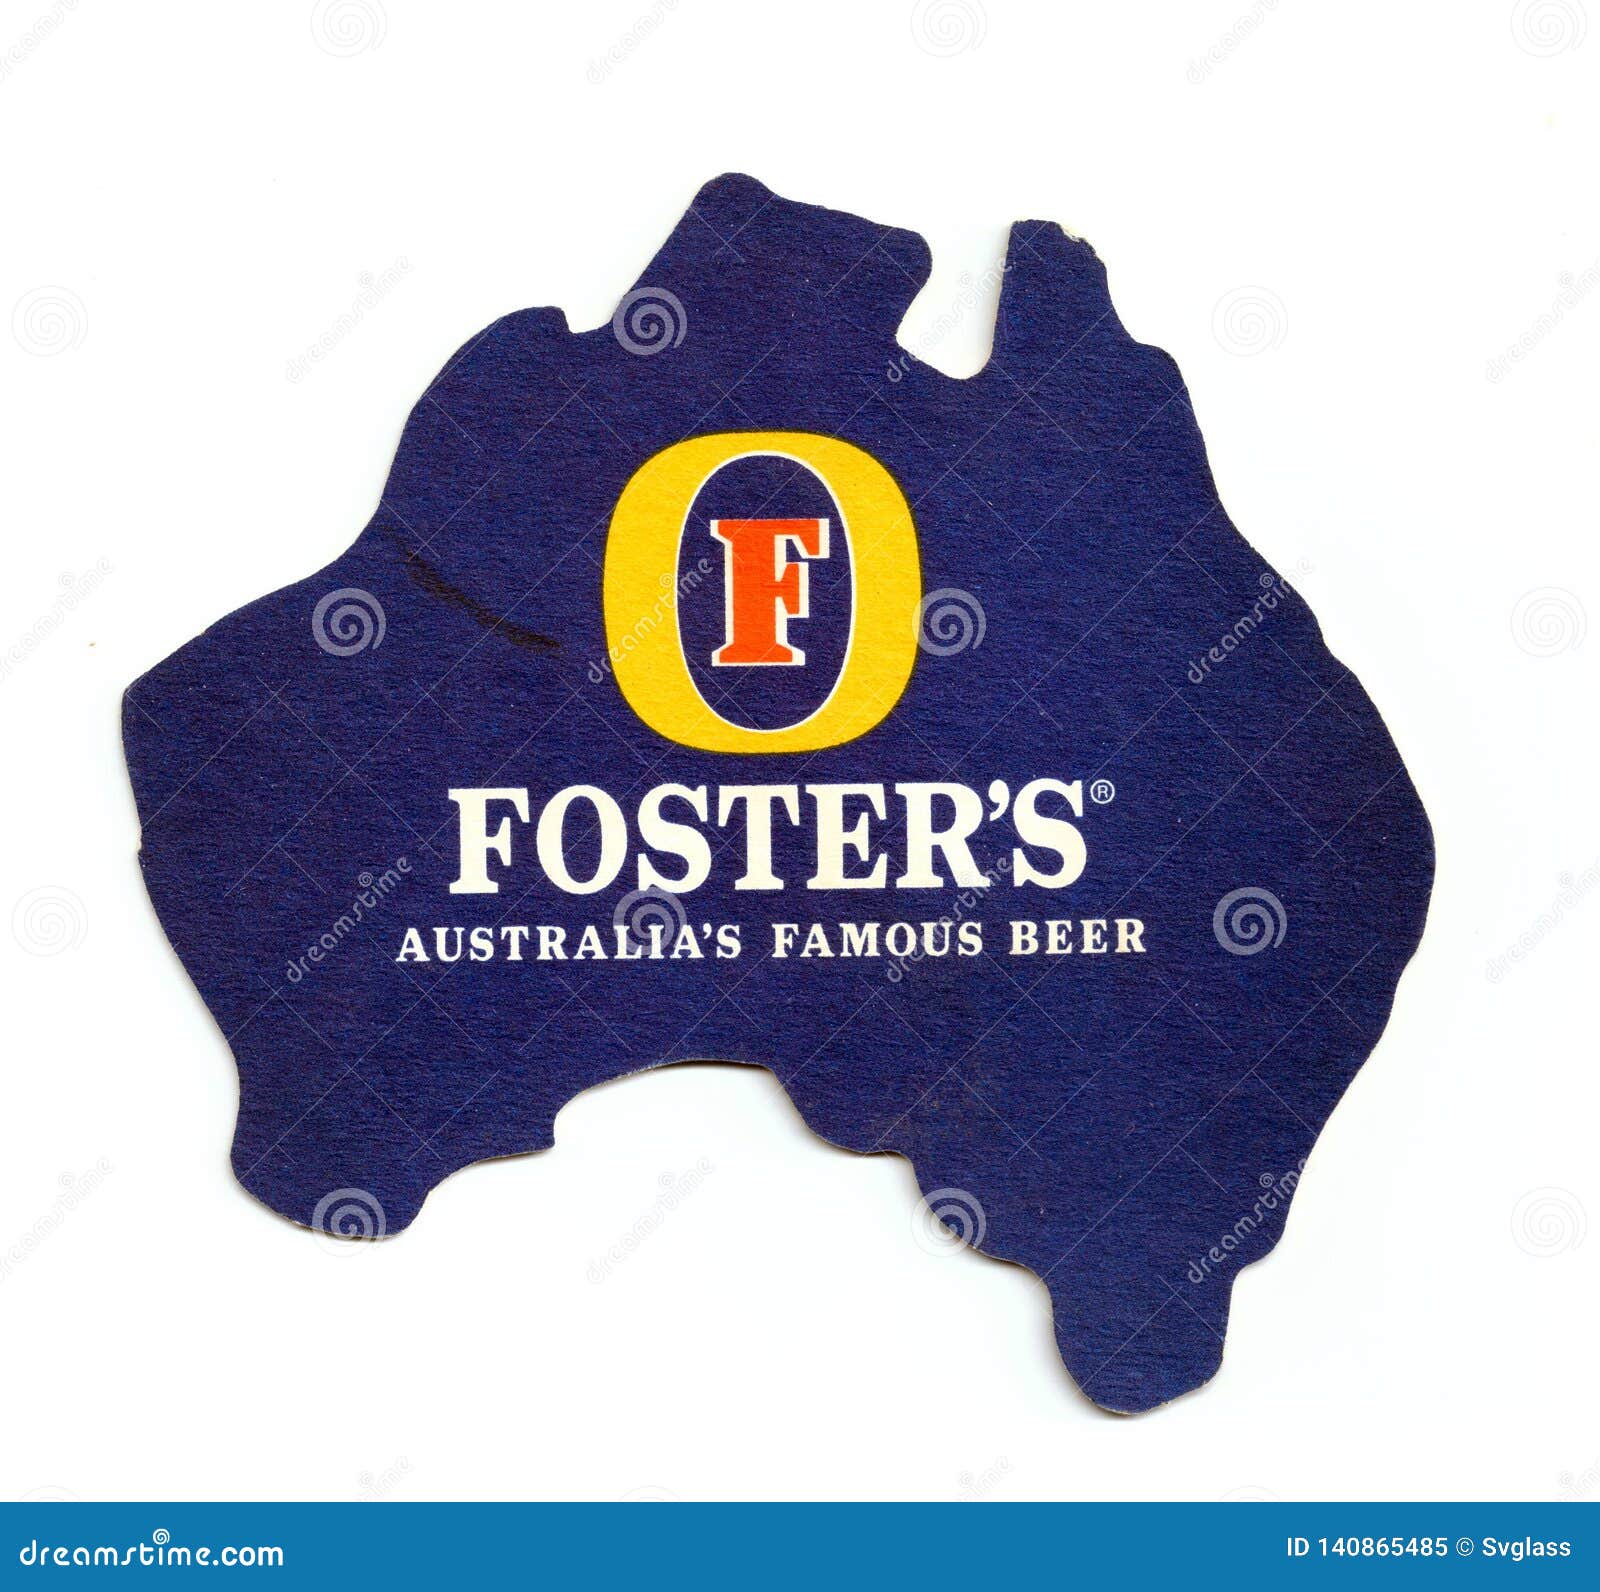 16 Foster's Australia's Famous Beer Coasters 